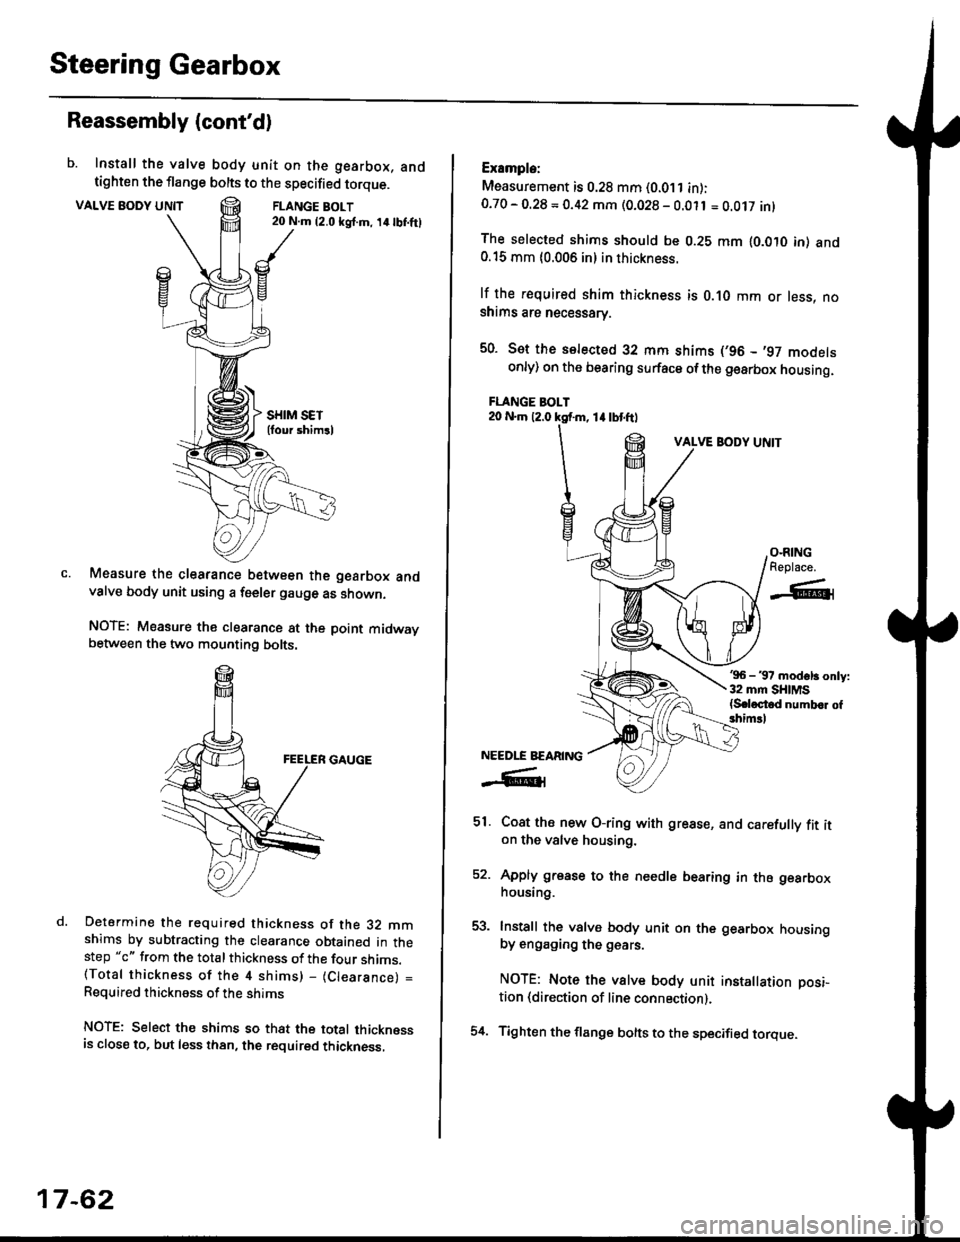 HONDA CIVIC 1998 6.G Service Manual Steering Gearbox
Reassembly (contd)
b. Install the valve body unit on the gearbox, andtighten the flange bolts to the specified torque.
VALVE BODY UNTTFLANGE BOLT20 N.m {2.0 ksl.m, 14lbI.ftl
Measure 